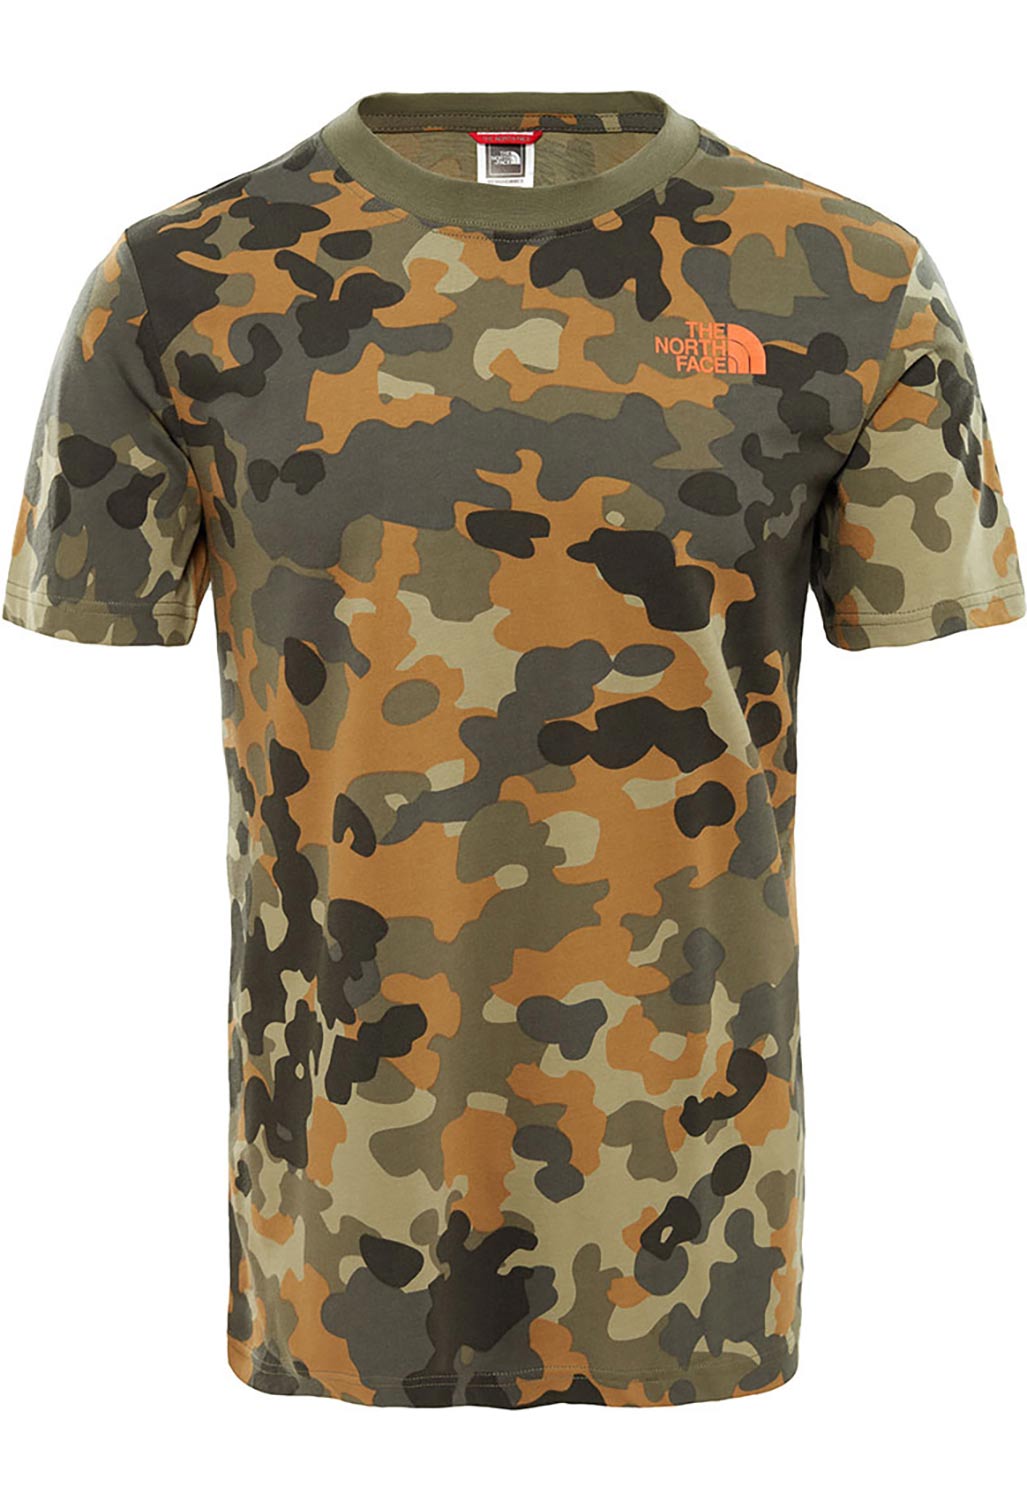 The North Face Red Box Men's T-Shirt - Taupe Green Camo